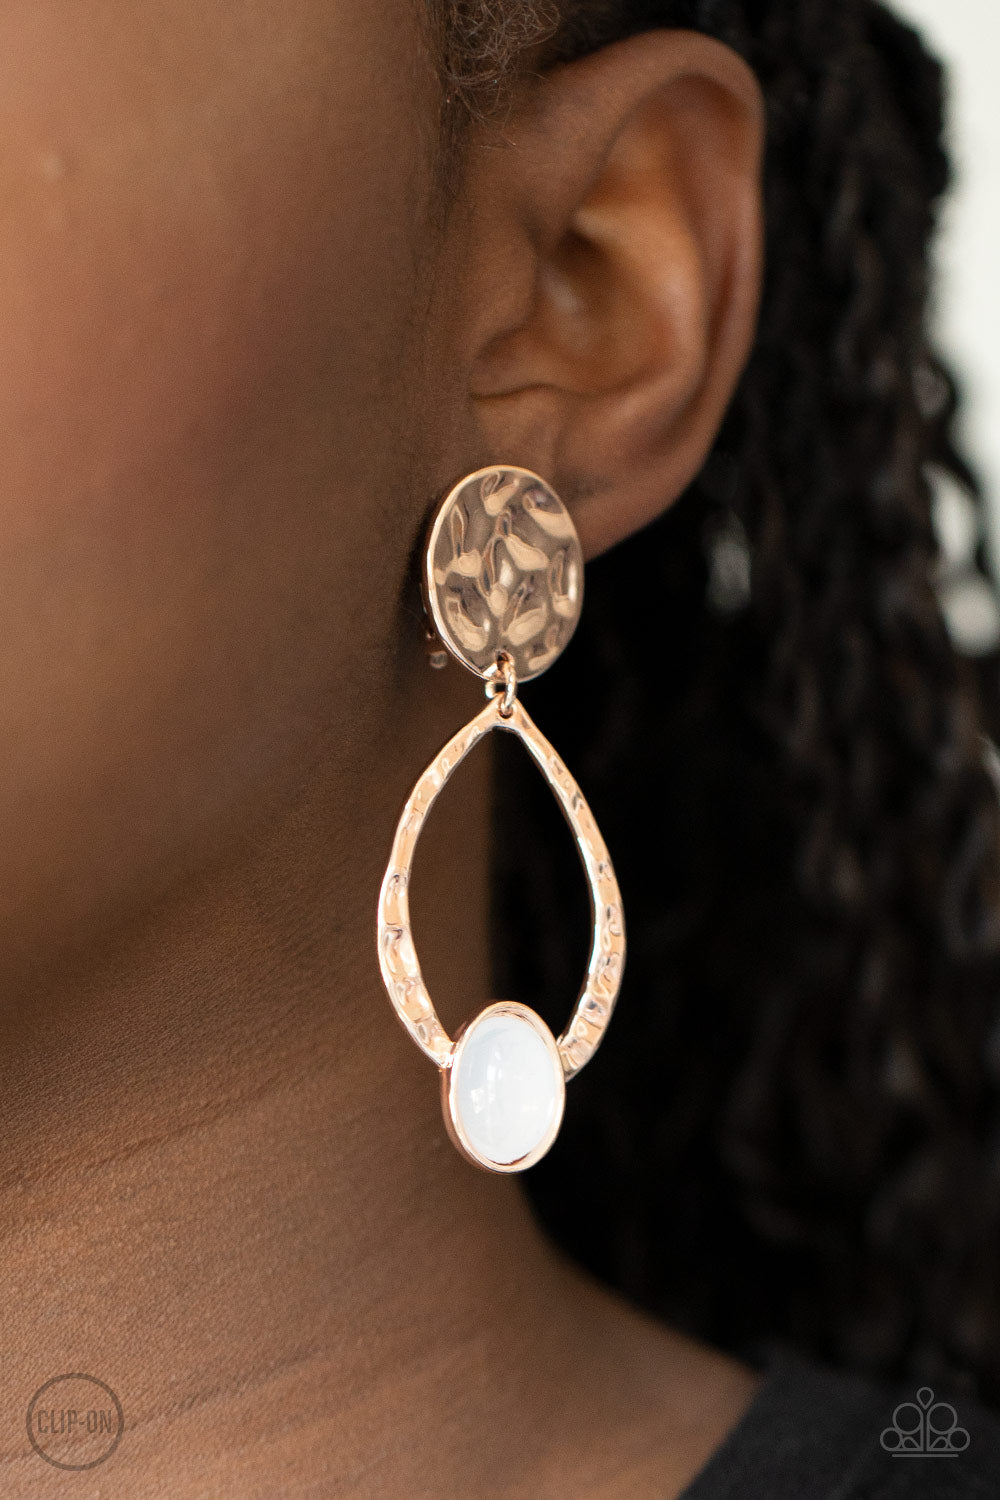 Opal Obsession Rose Gold
Clip-On Earrings